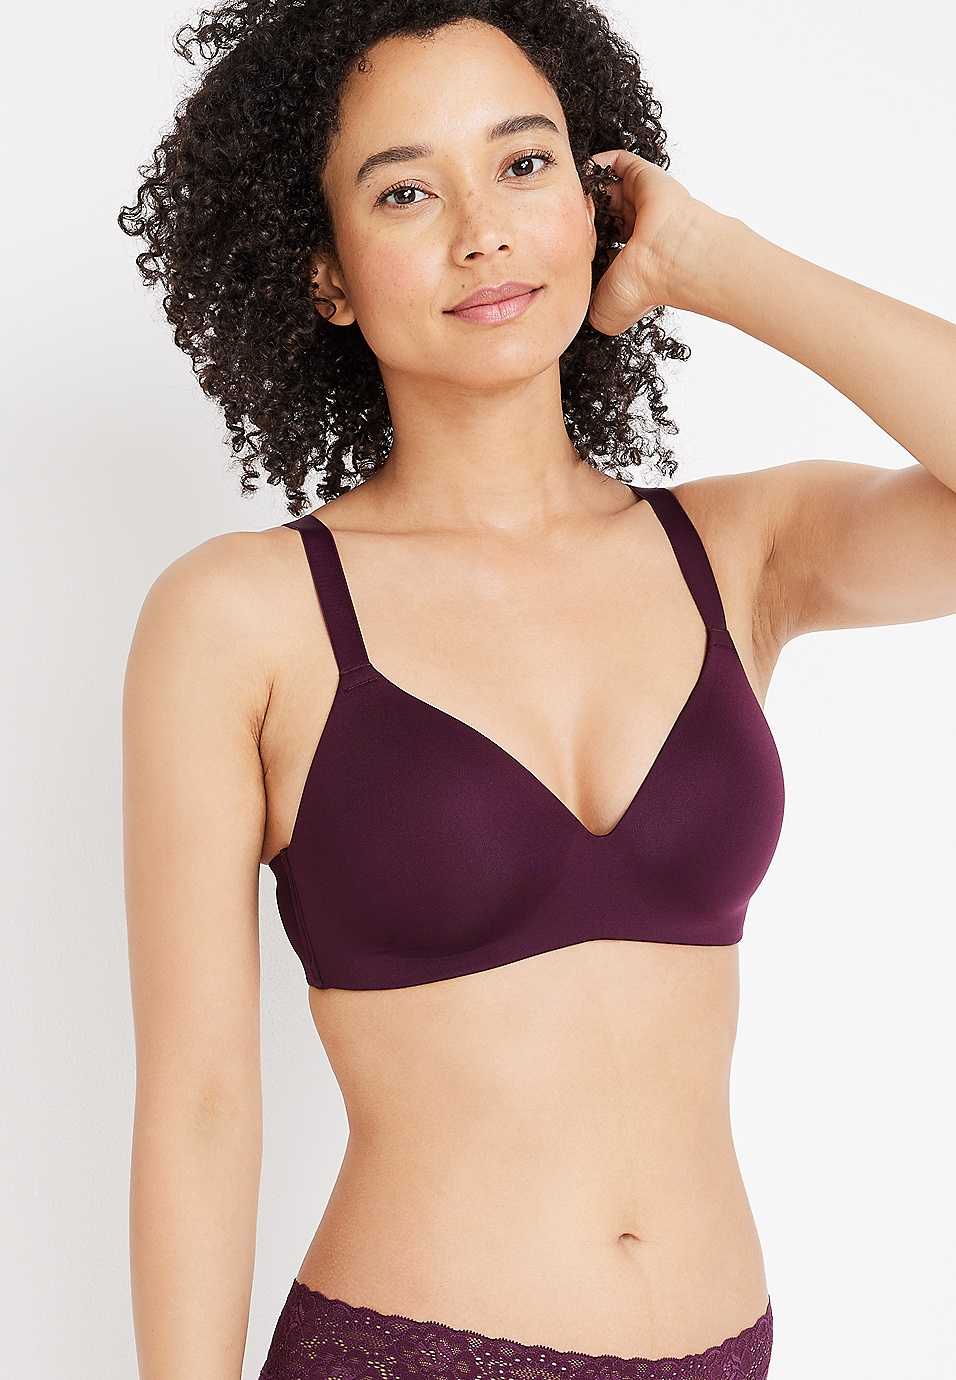 Maurices SmoothBliss Wireless Full Coverage Bra